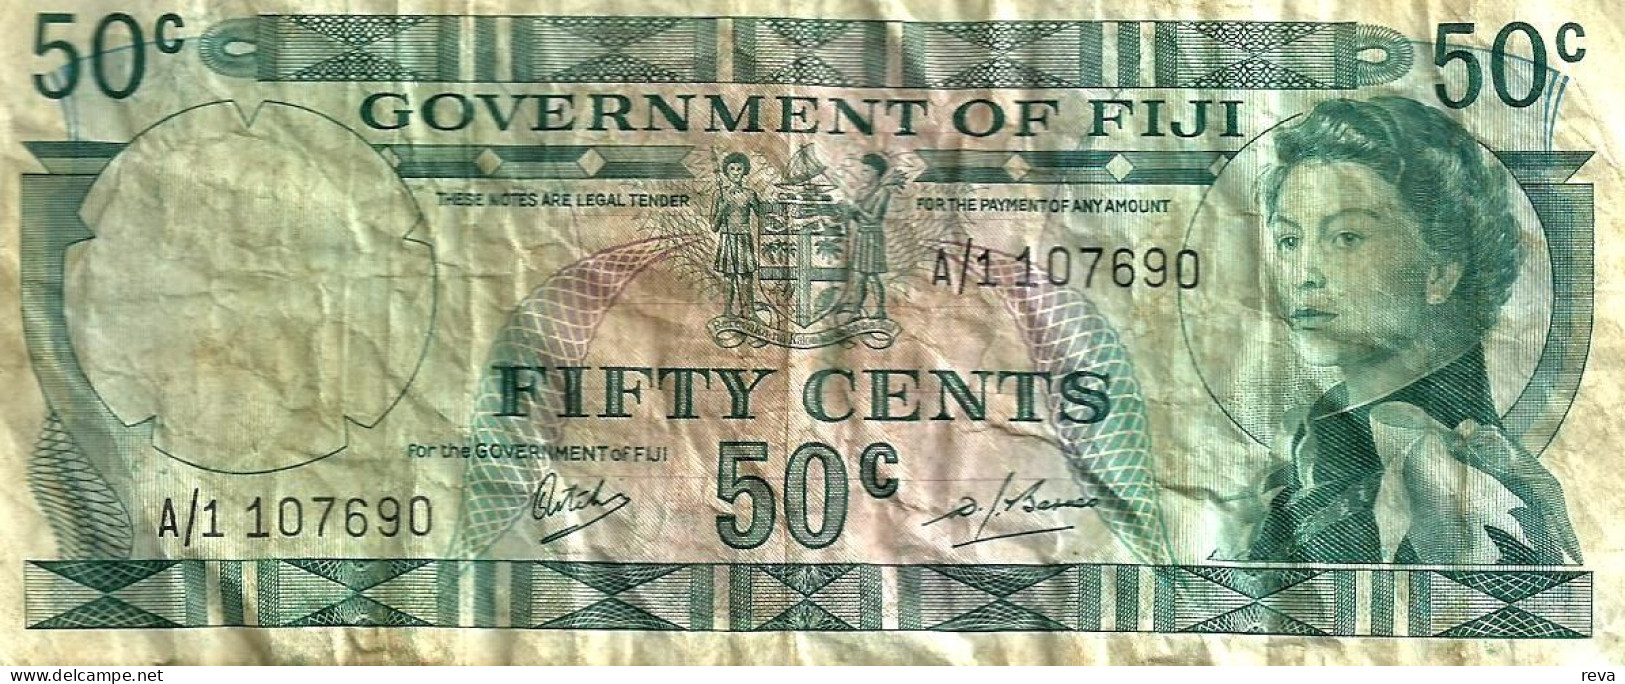 FIJI 50 CENTS BLUE NAME OF COUNTRY QEII HEAD FRONT & NATIVE HUT BACK ND(1968)P.58a SIG. RITCHIE-BARNES READ DESCRIPTION - Fiji